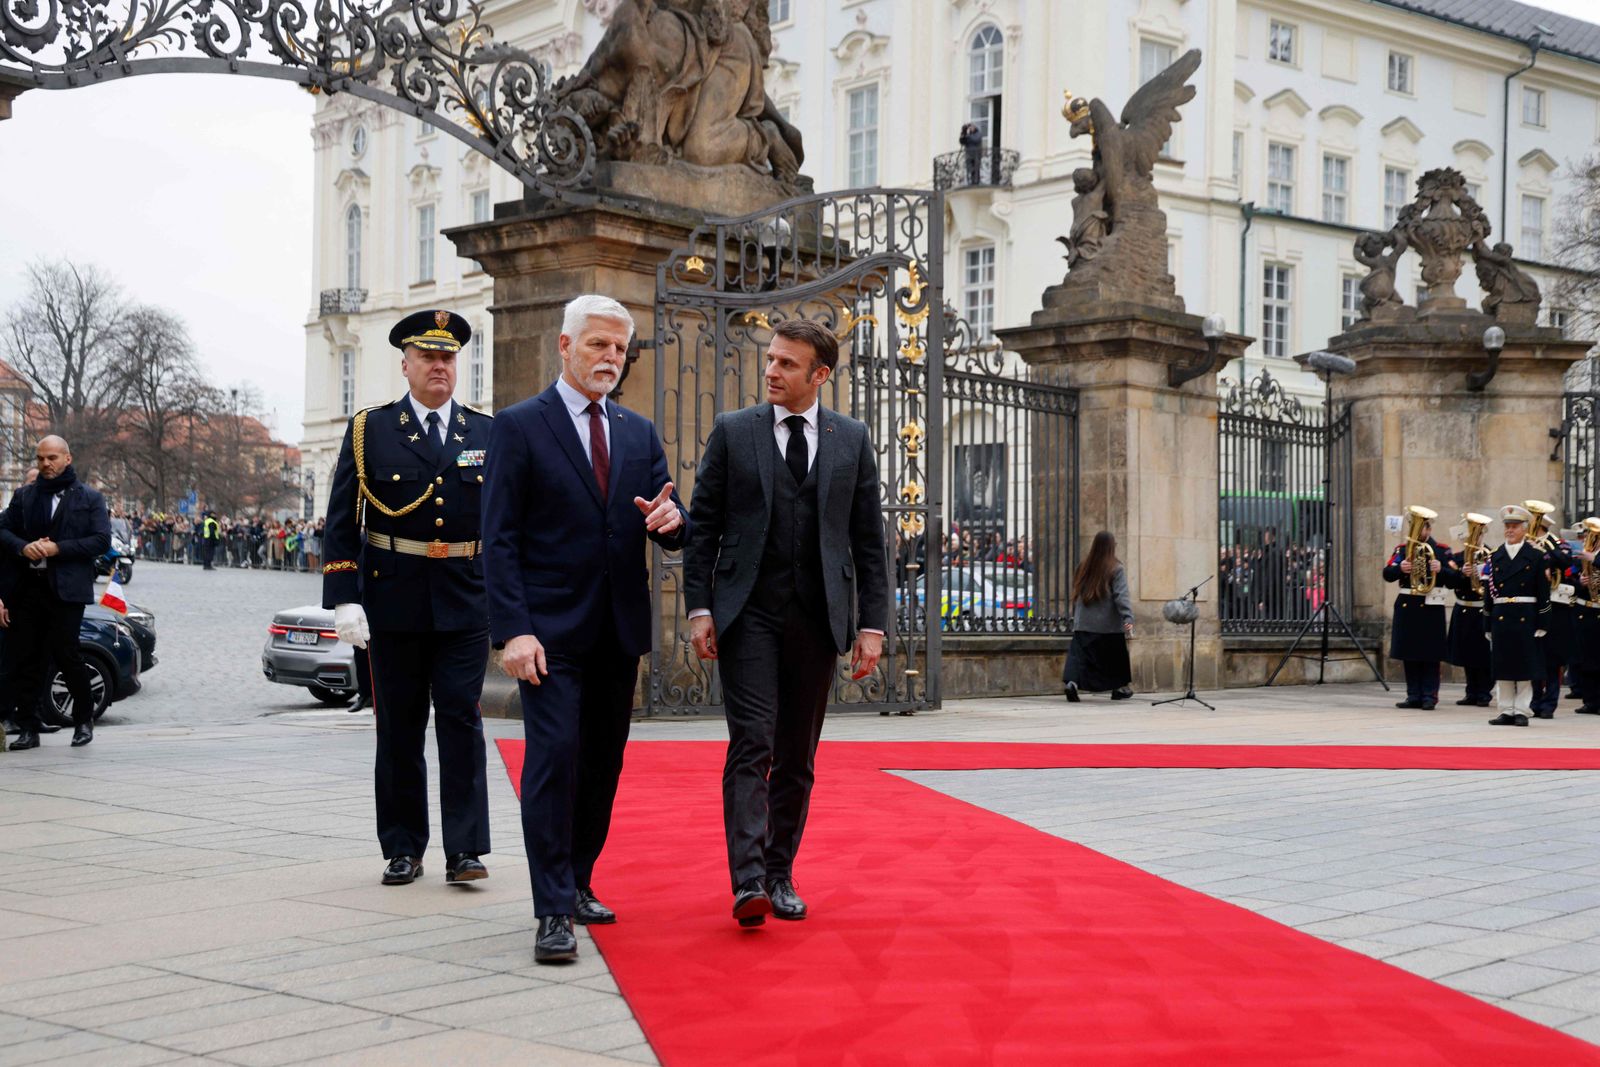 Czech President Petr Pavel (C) welcomes French President Emmanuel Macron (R) for his visit in front of the Castle in Prague, Czech Republic, on March 5, 2024. (Photo by Ludovic MARIN / AFP)